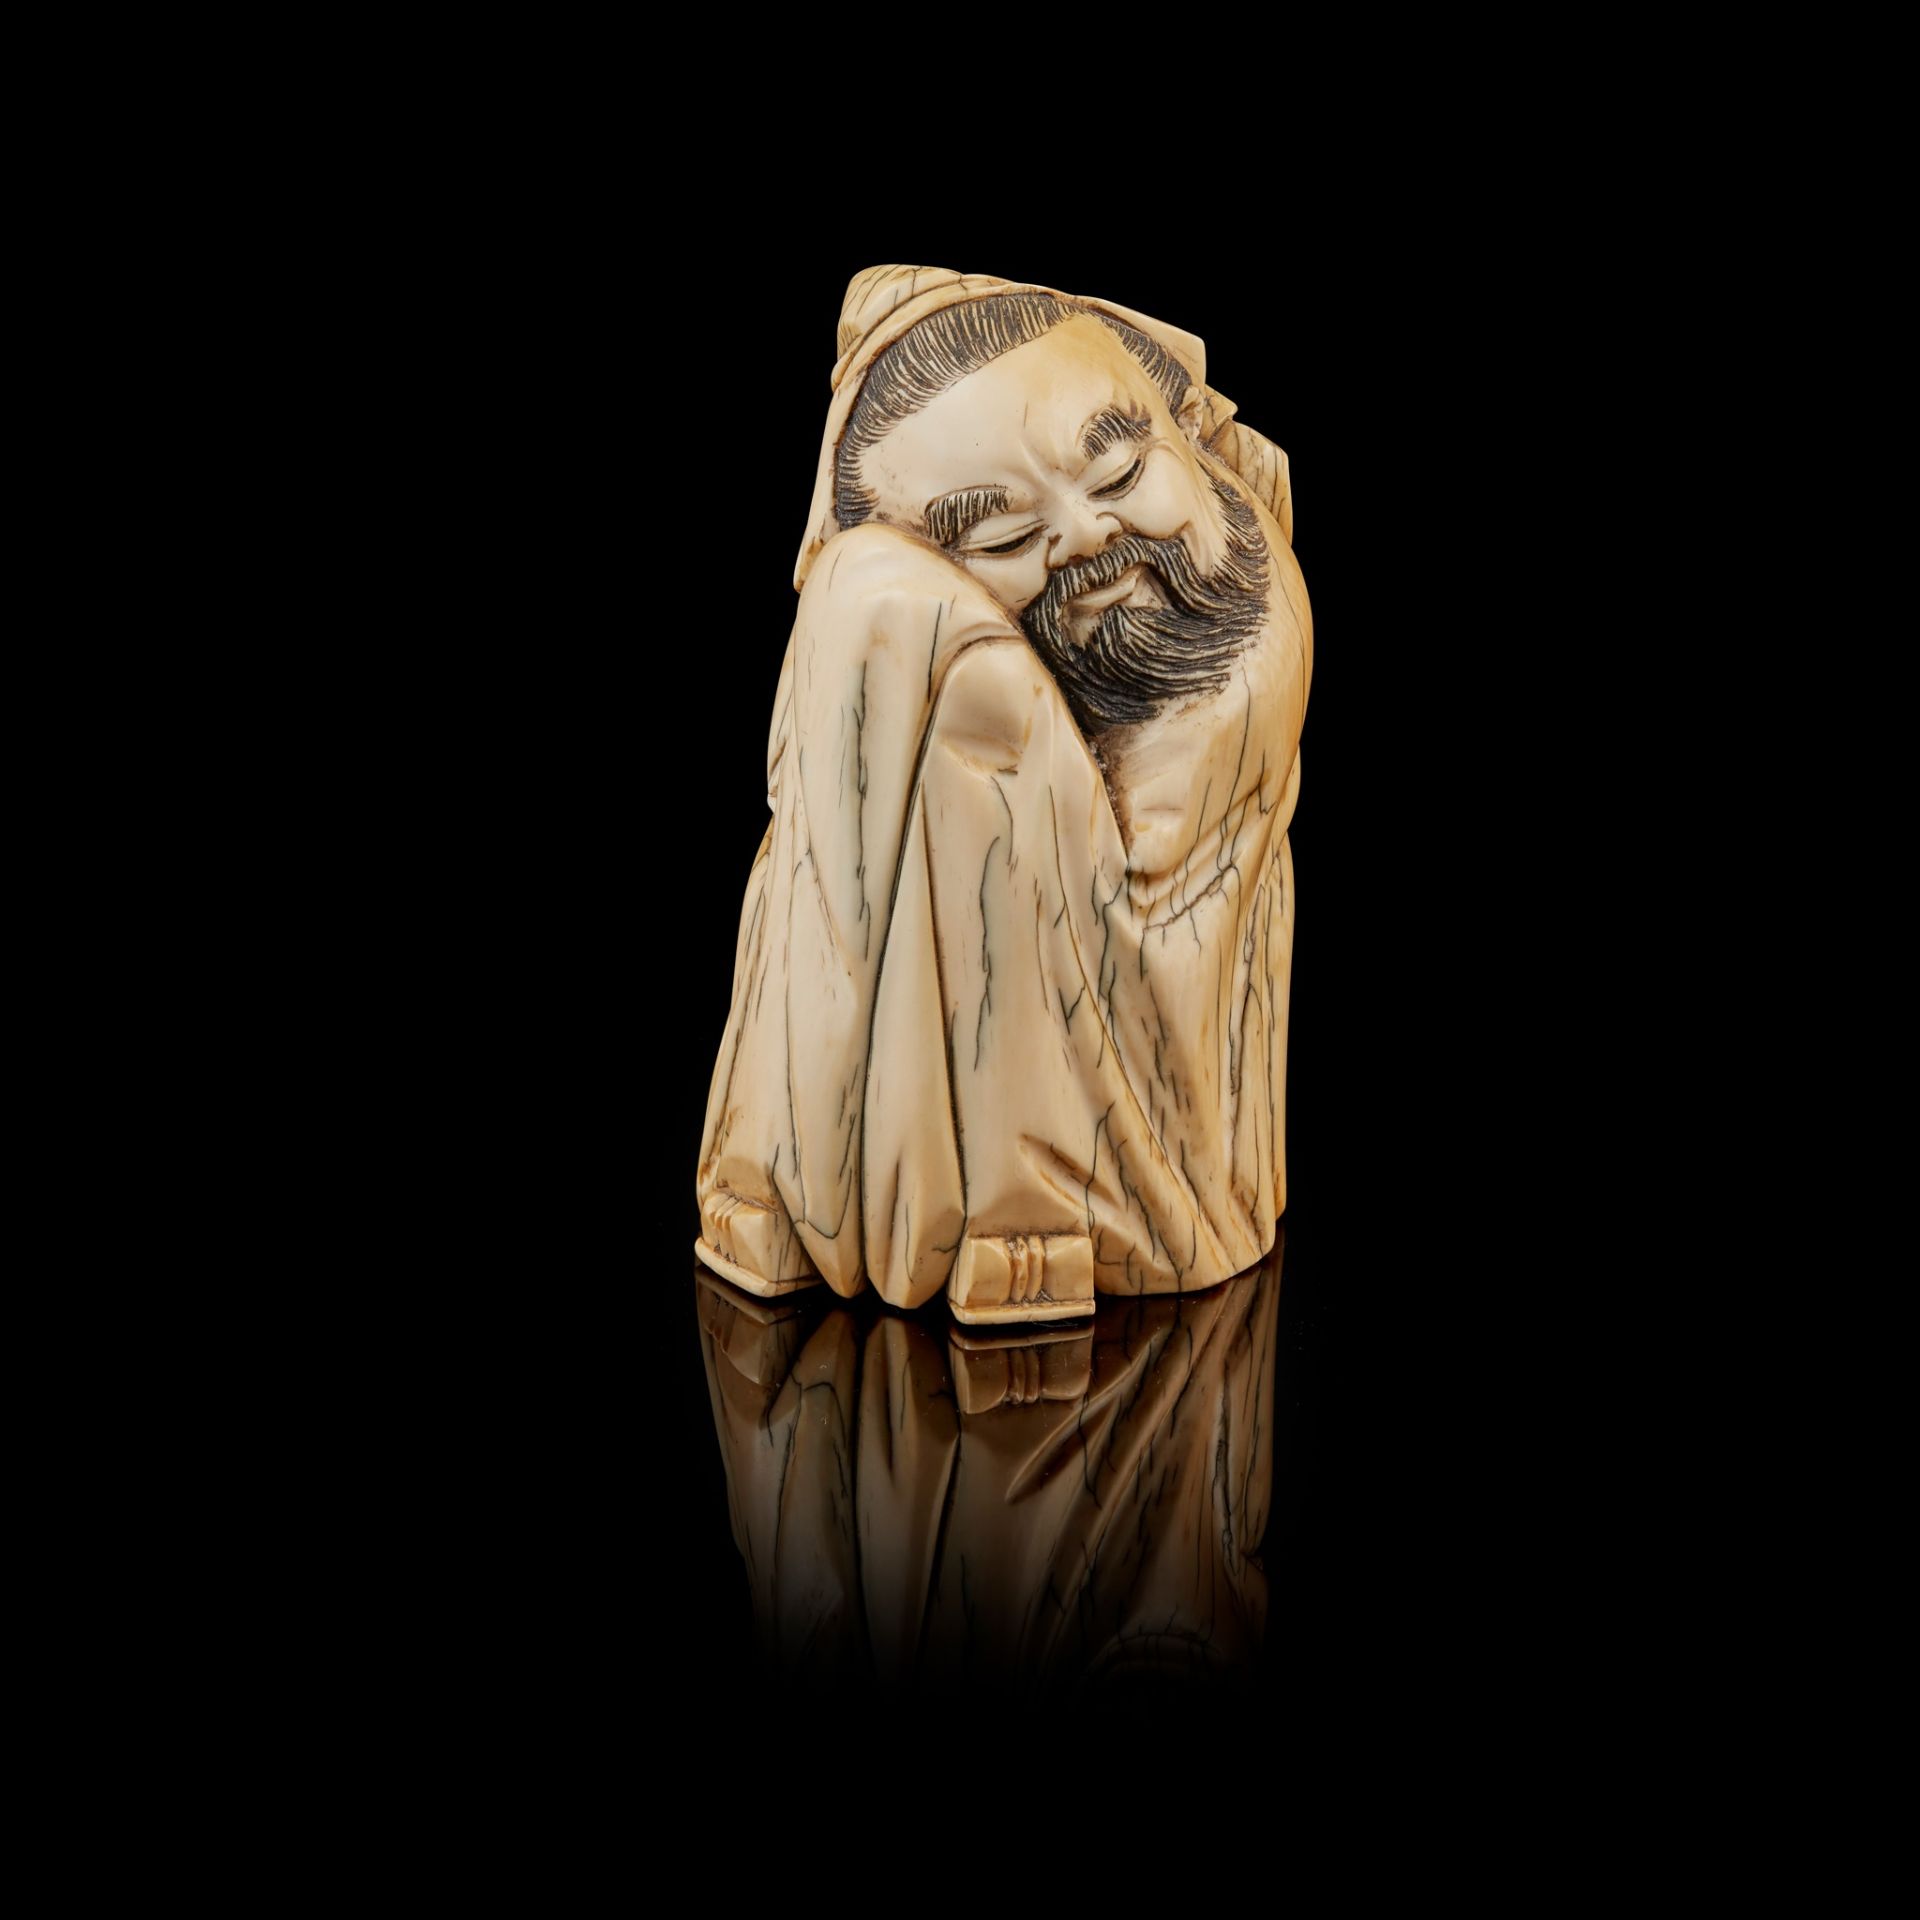 Y IVORY CARVING OF A NAPPING SCHOLAR MING TO QING DYNASTY, 17TH-18TH CENTURY - Image 2 of 2